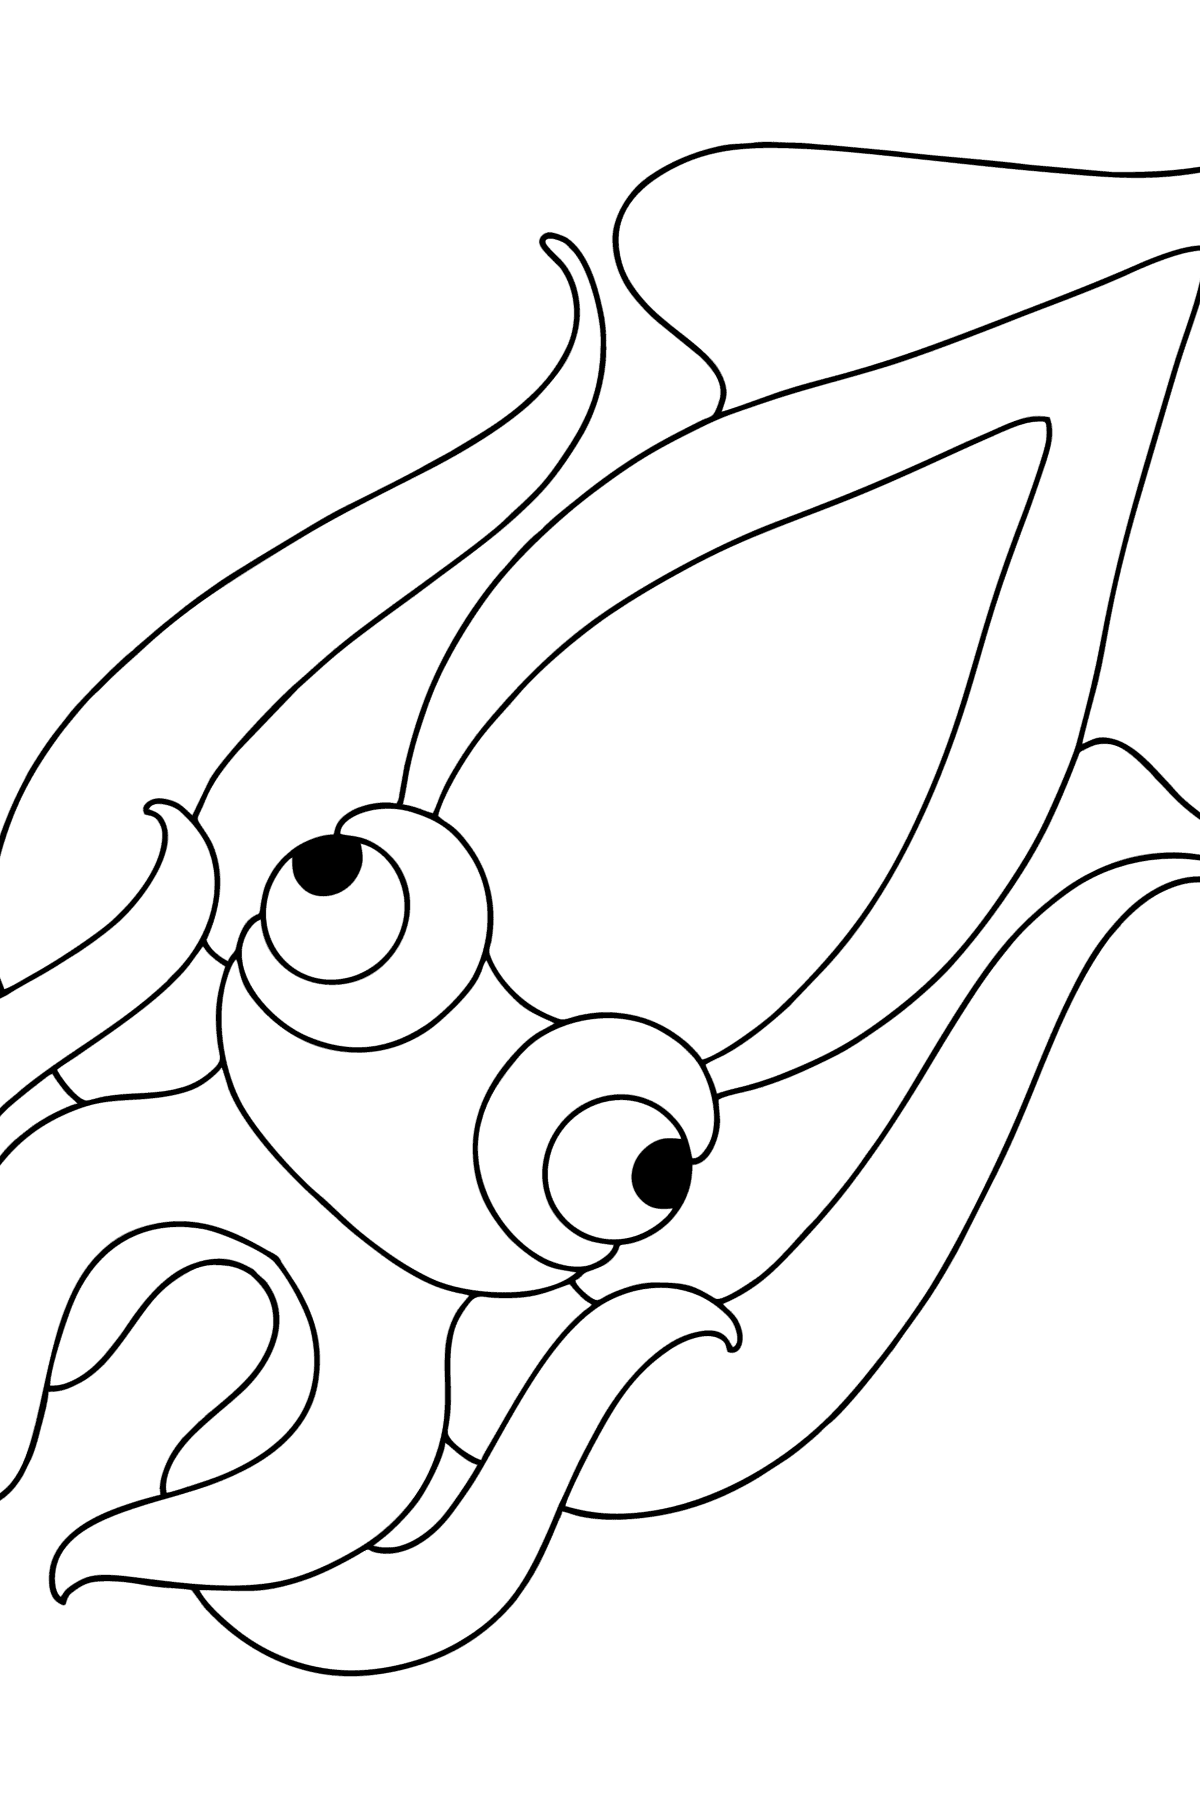 Squid coloring page - Coloring Pages for Kids